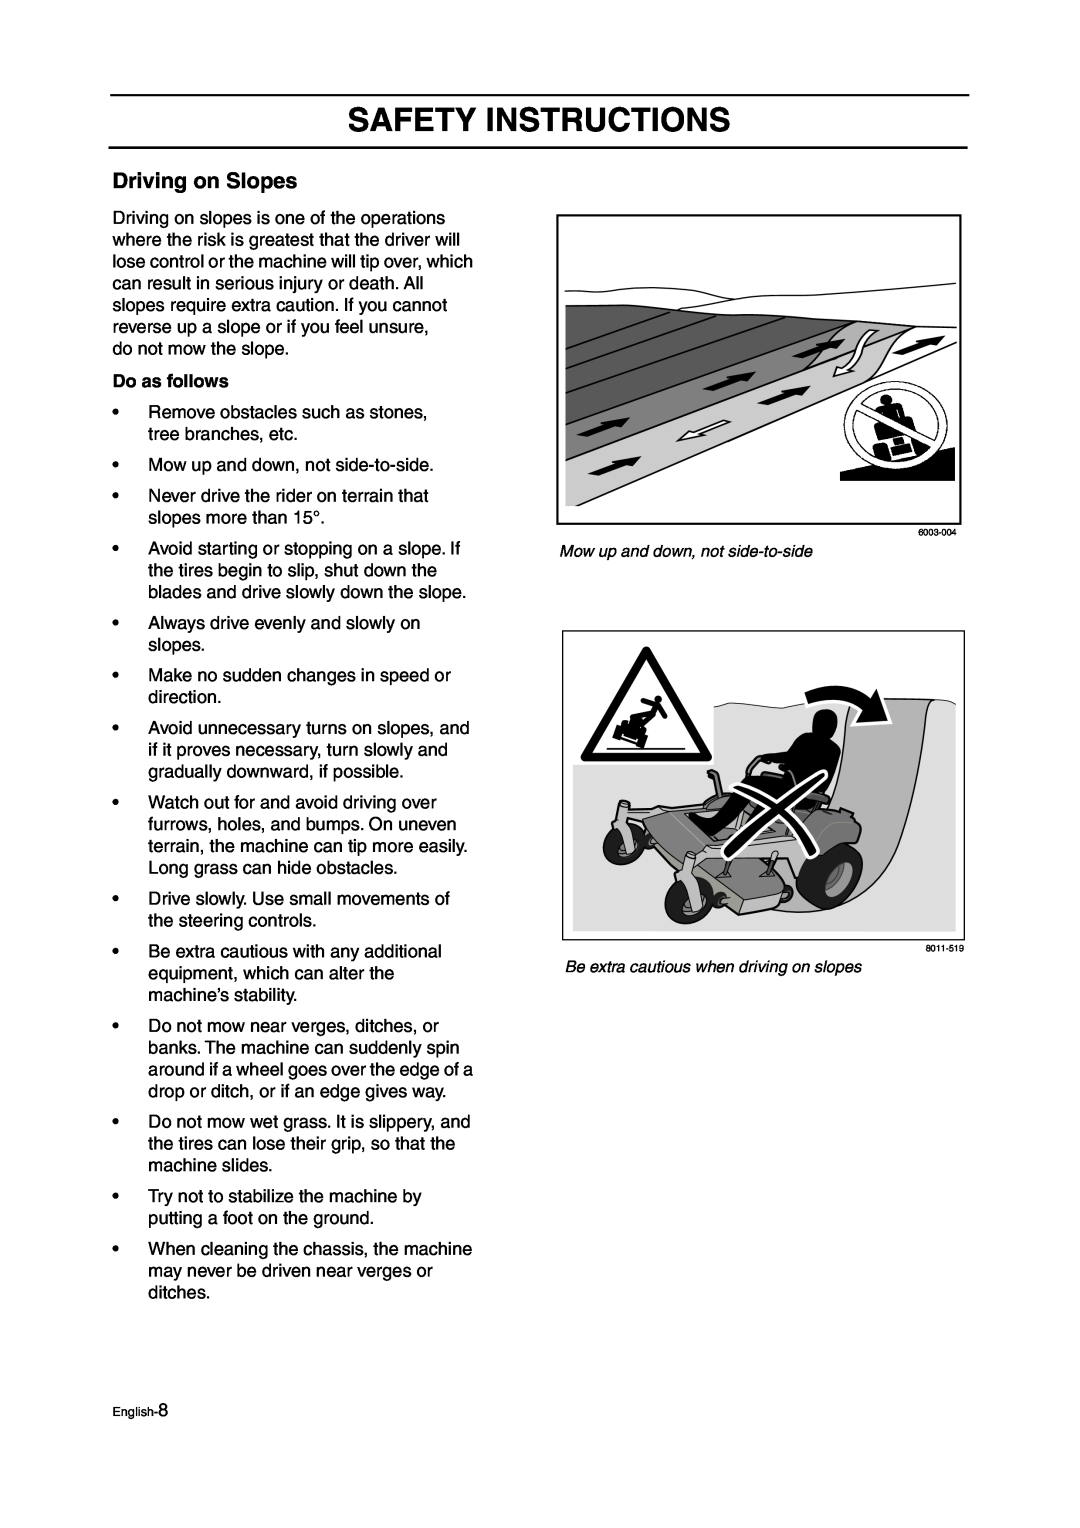 Husqvarna ZTH manual Driving on Slopes, Do as follows, Safety Instructions 